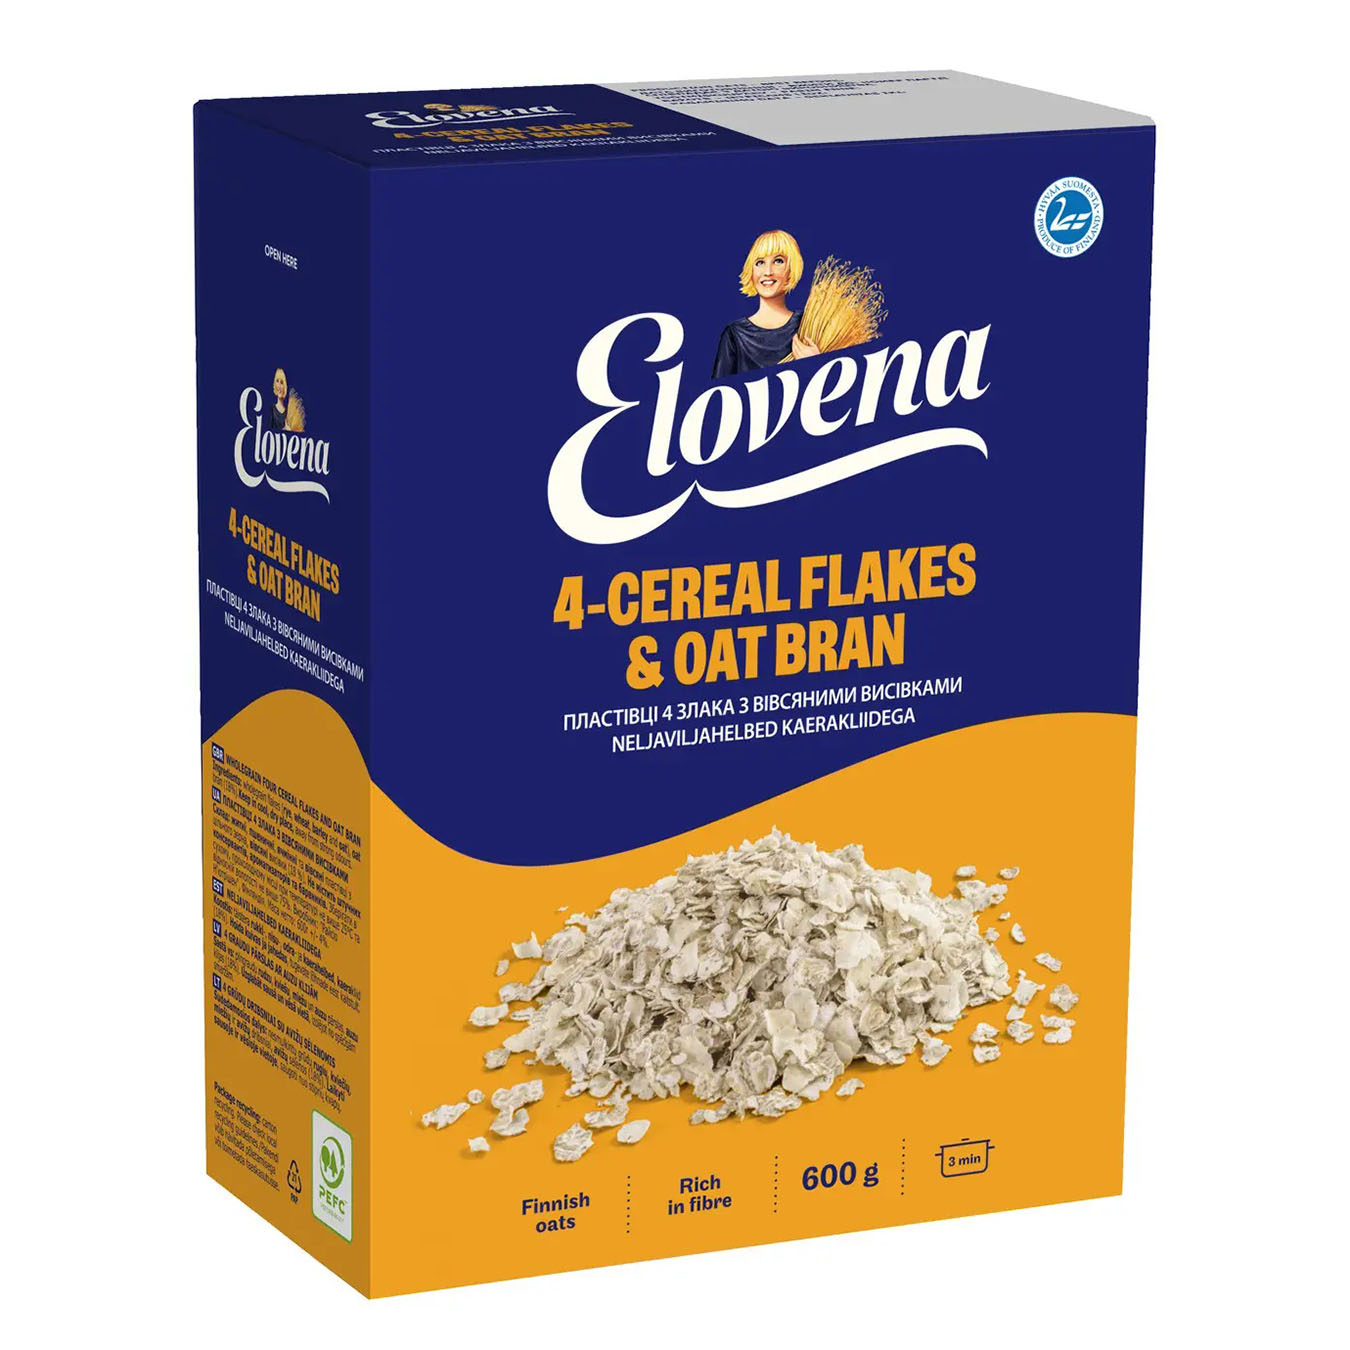 Elovena Cereal flakes 4 kinds of cereals with oat bran 600g